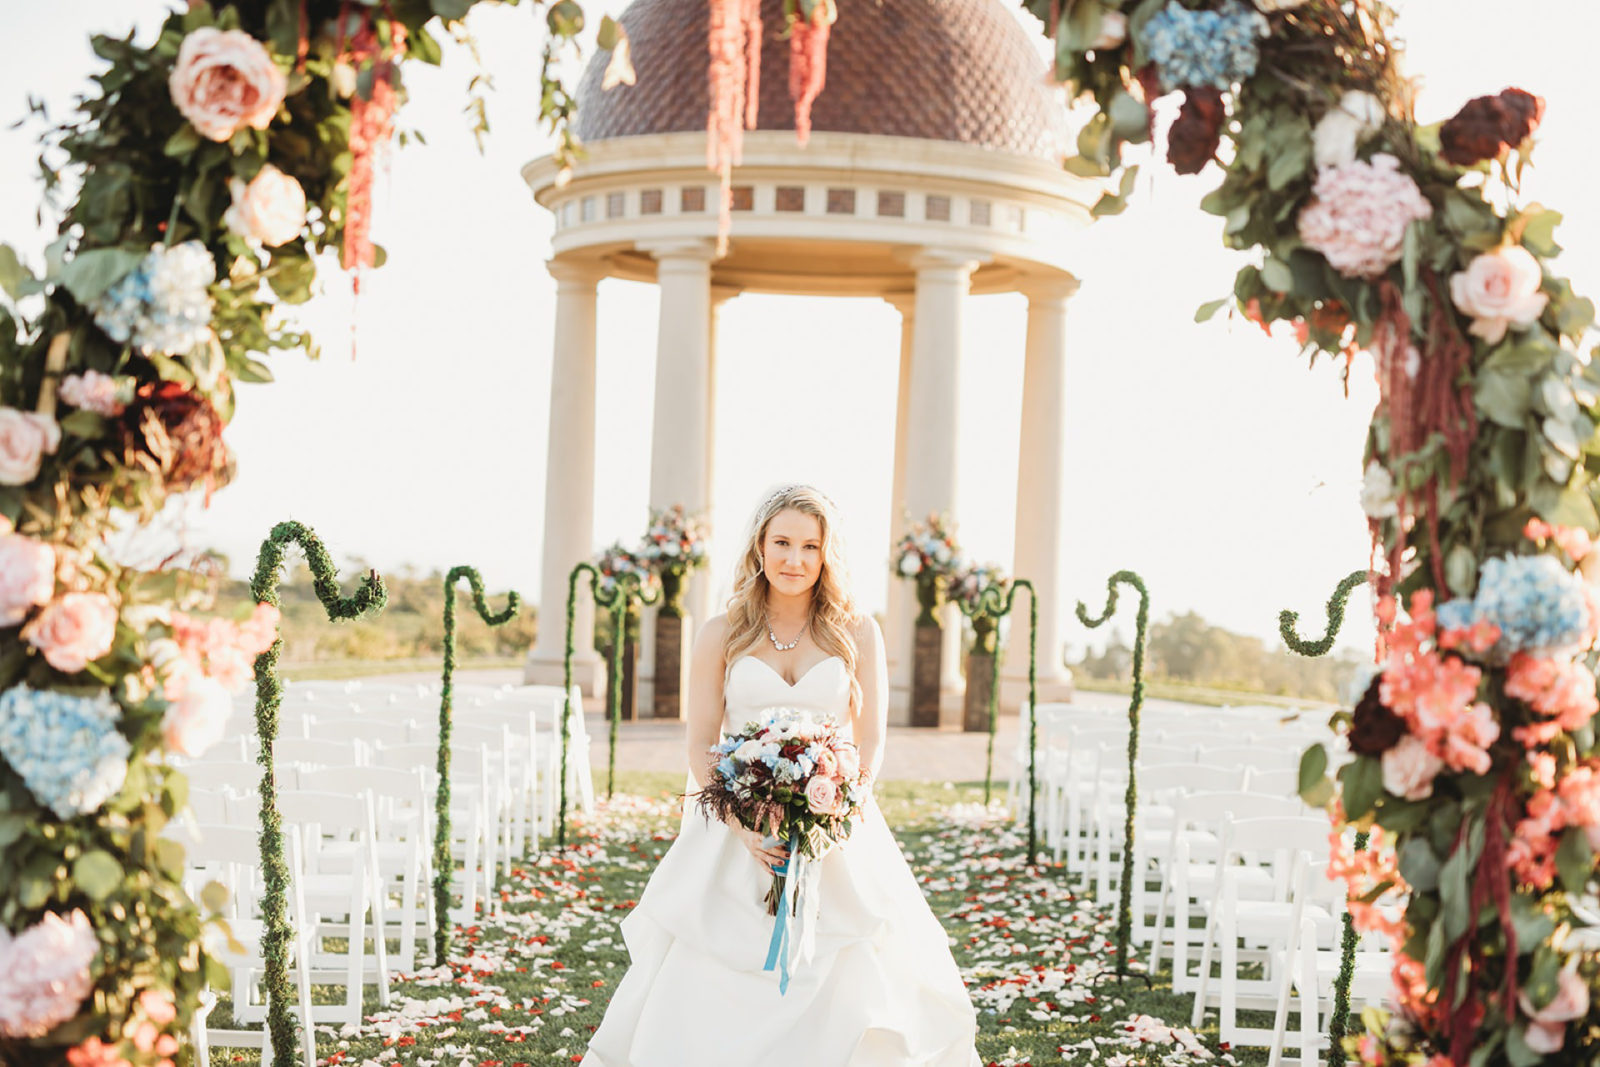 bride walking down aisle after wedding is over framed by floral arch at a pelican hill wedding